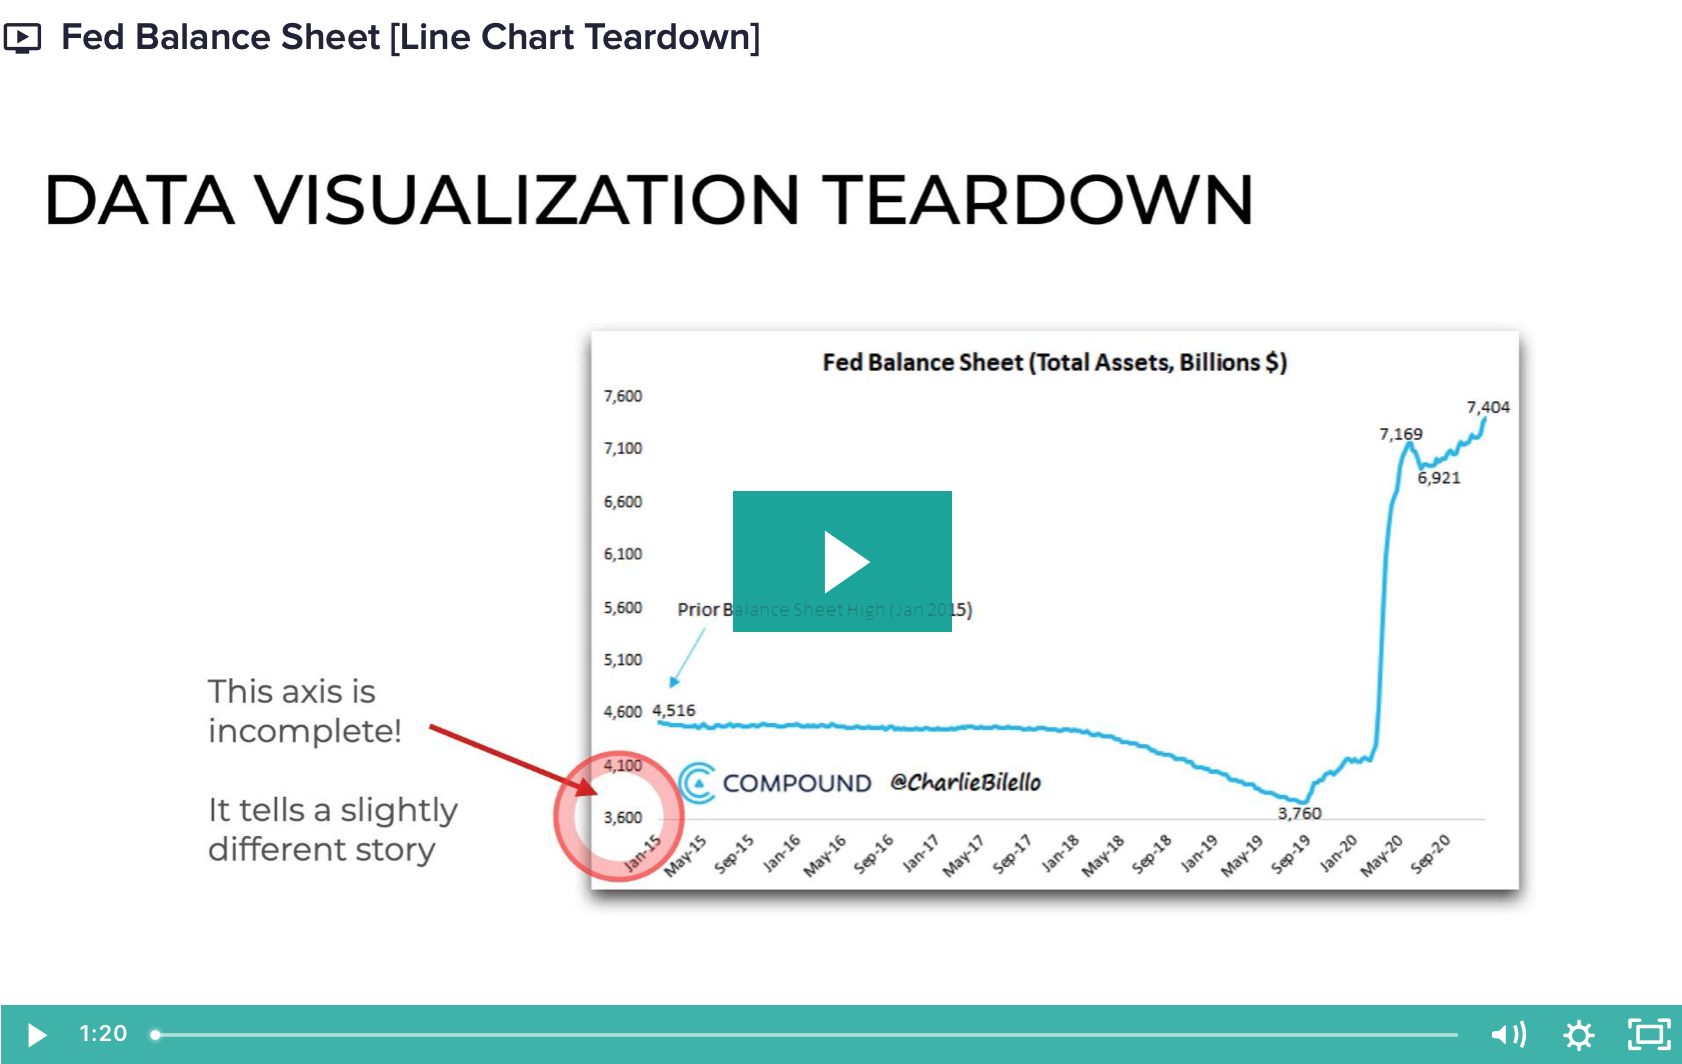 An image of a video that shows a "teardown" of a line chart.